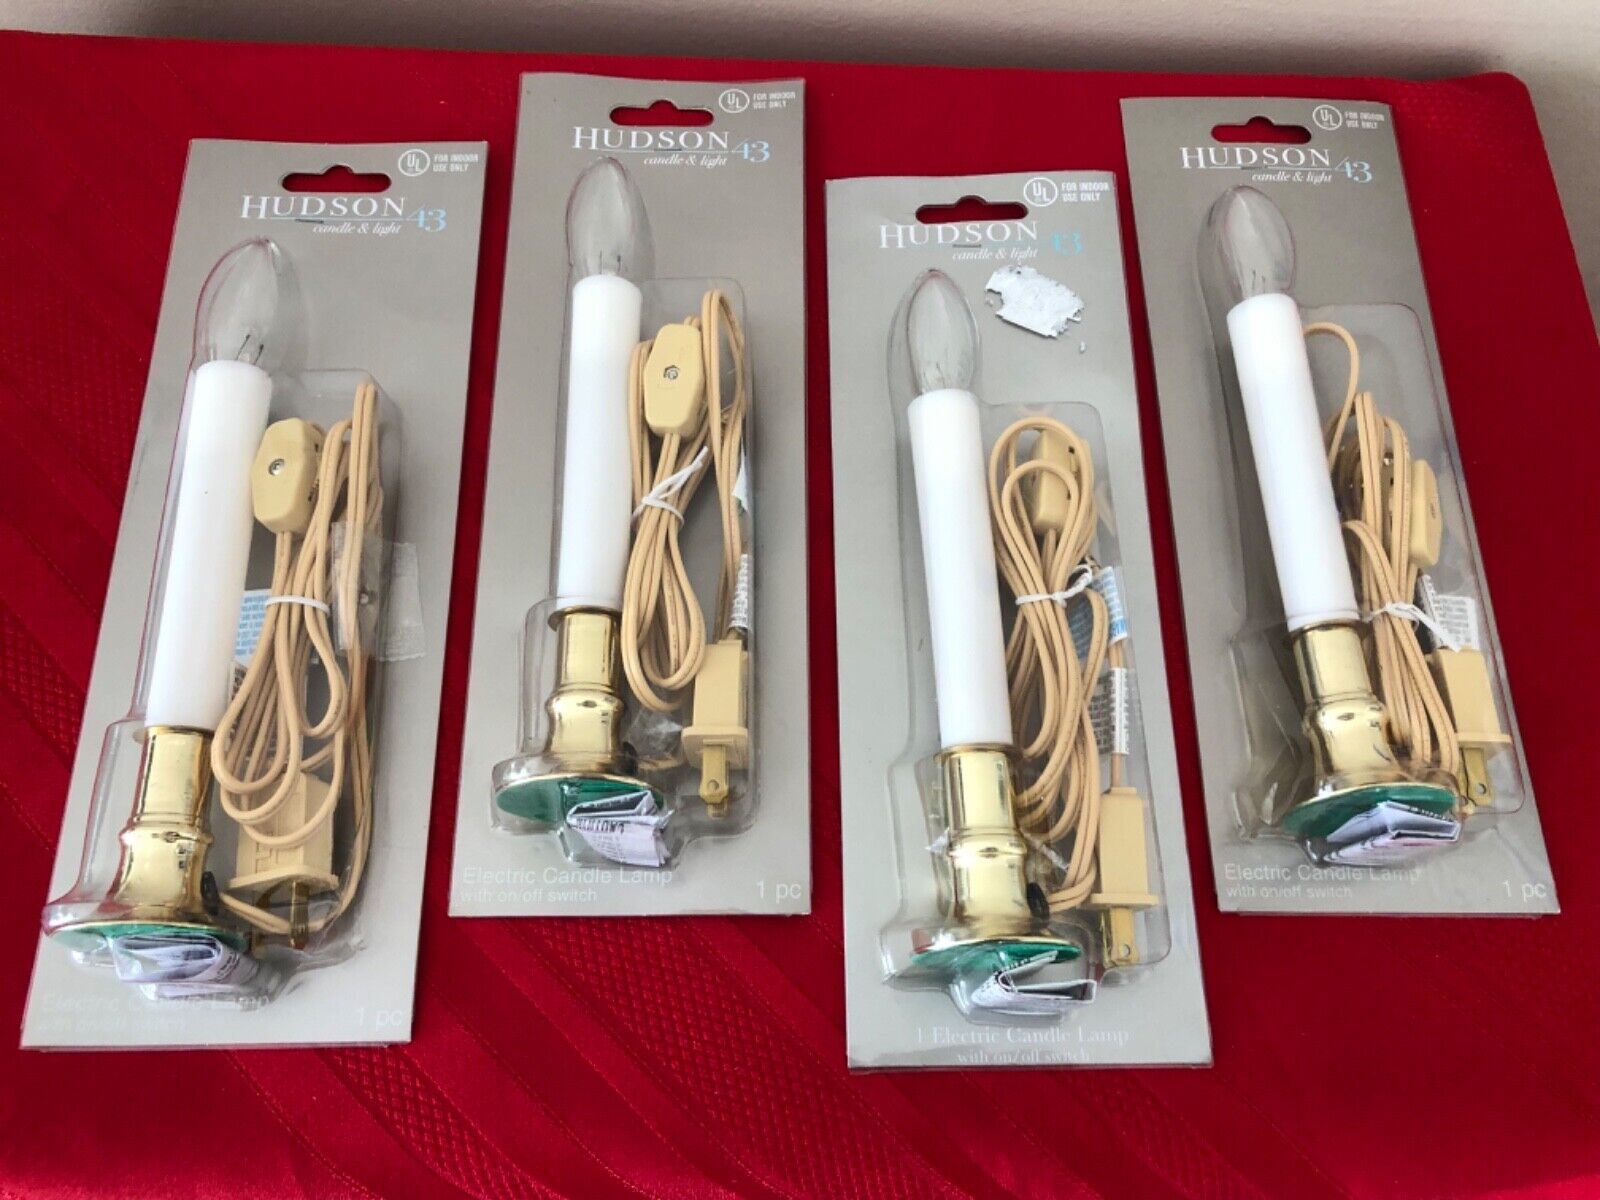 Hudson 43 Candle Lamps (4)  New in Package